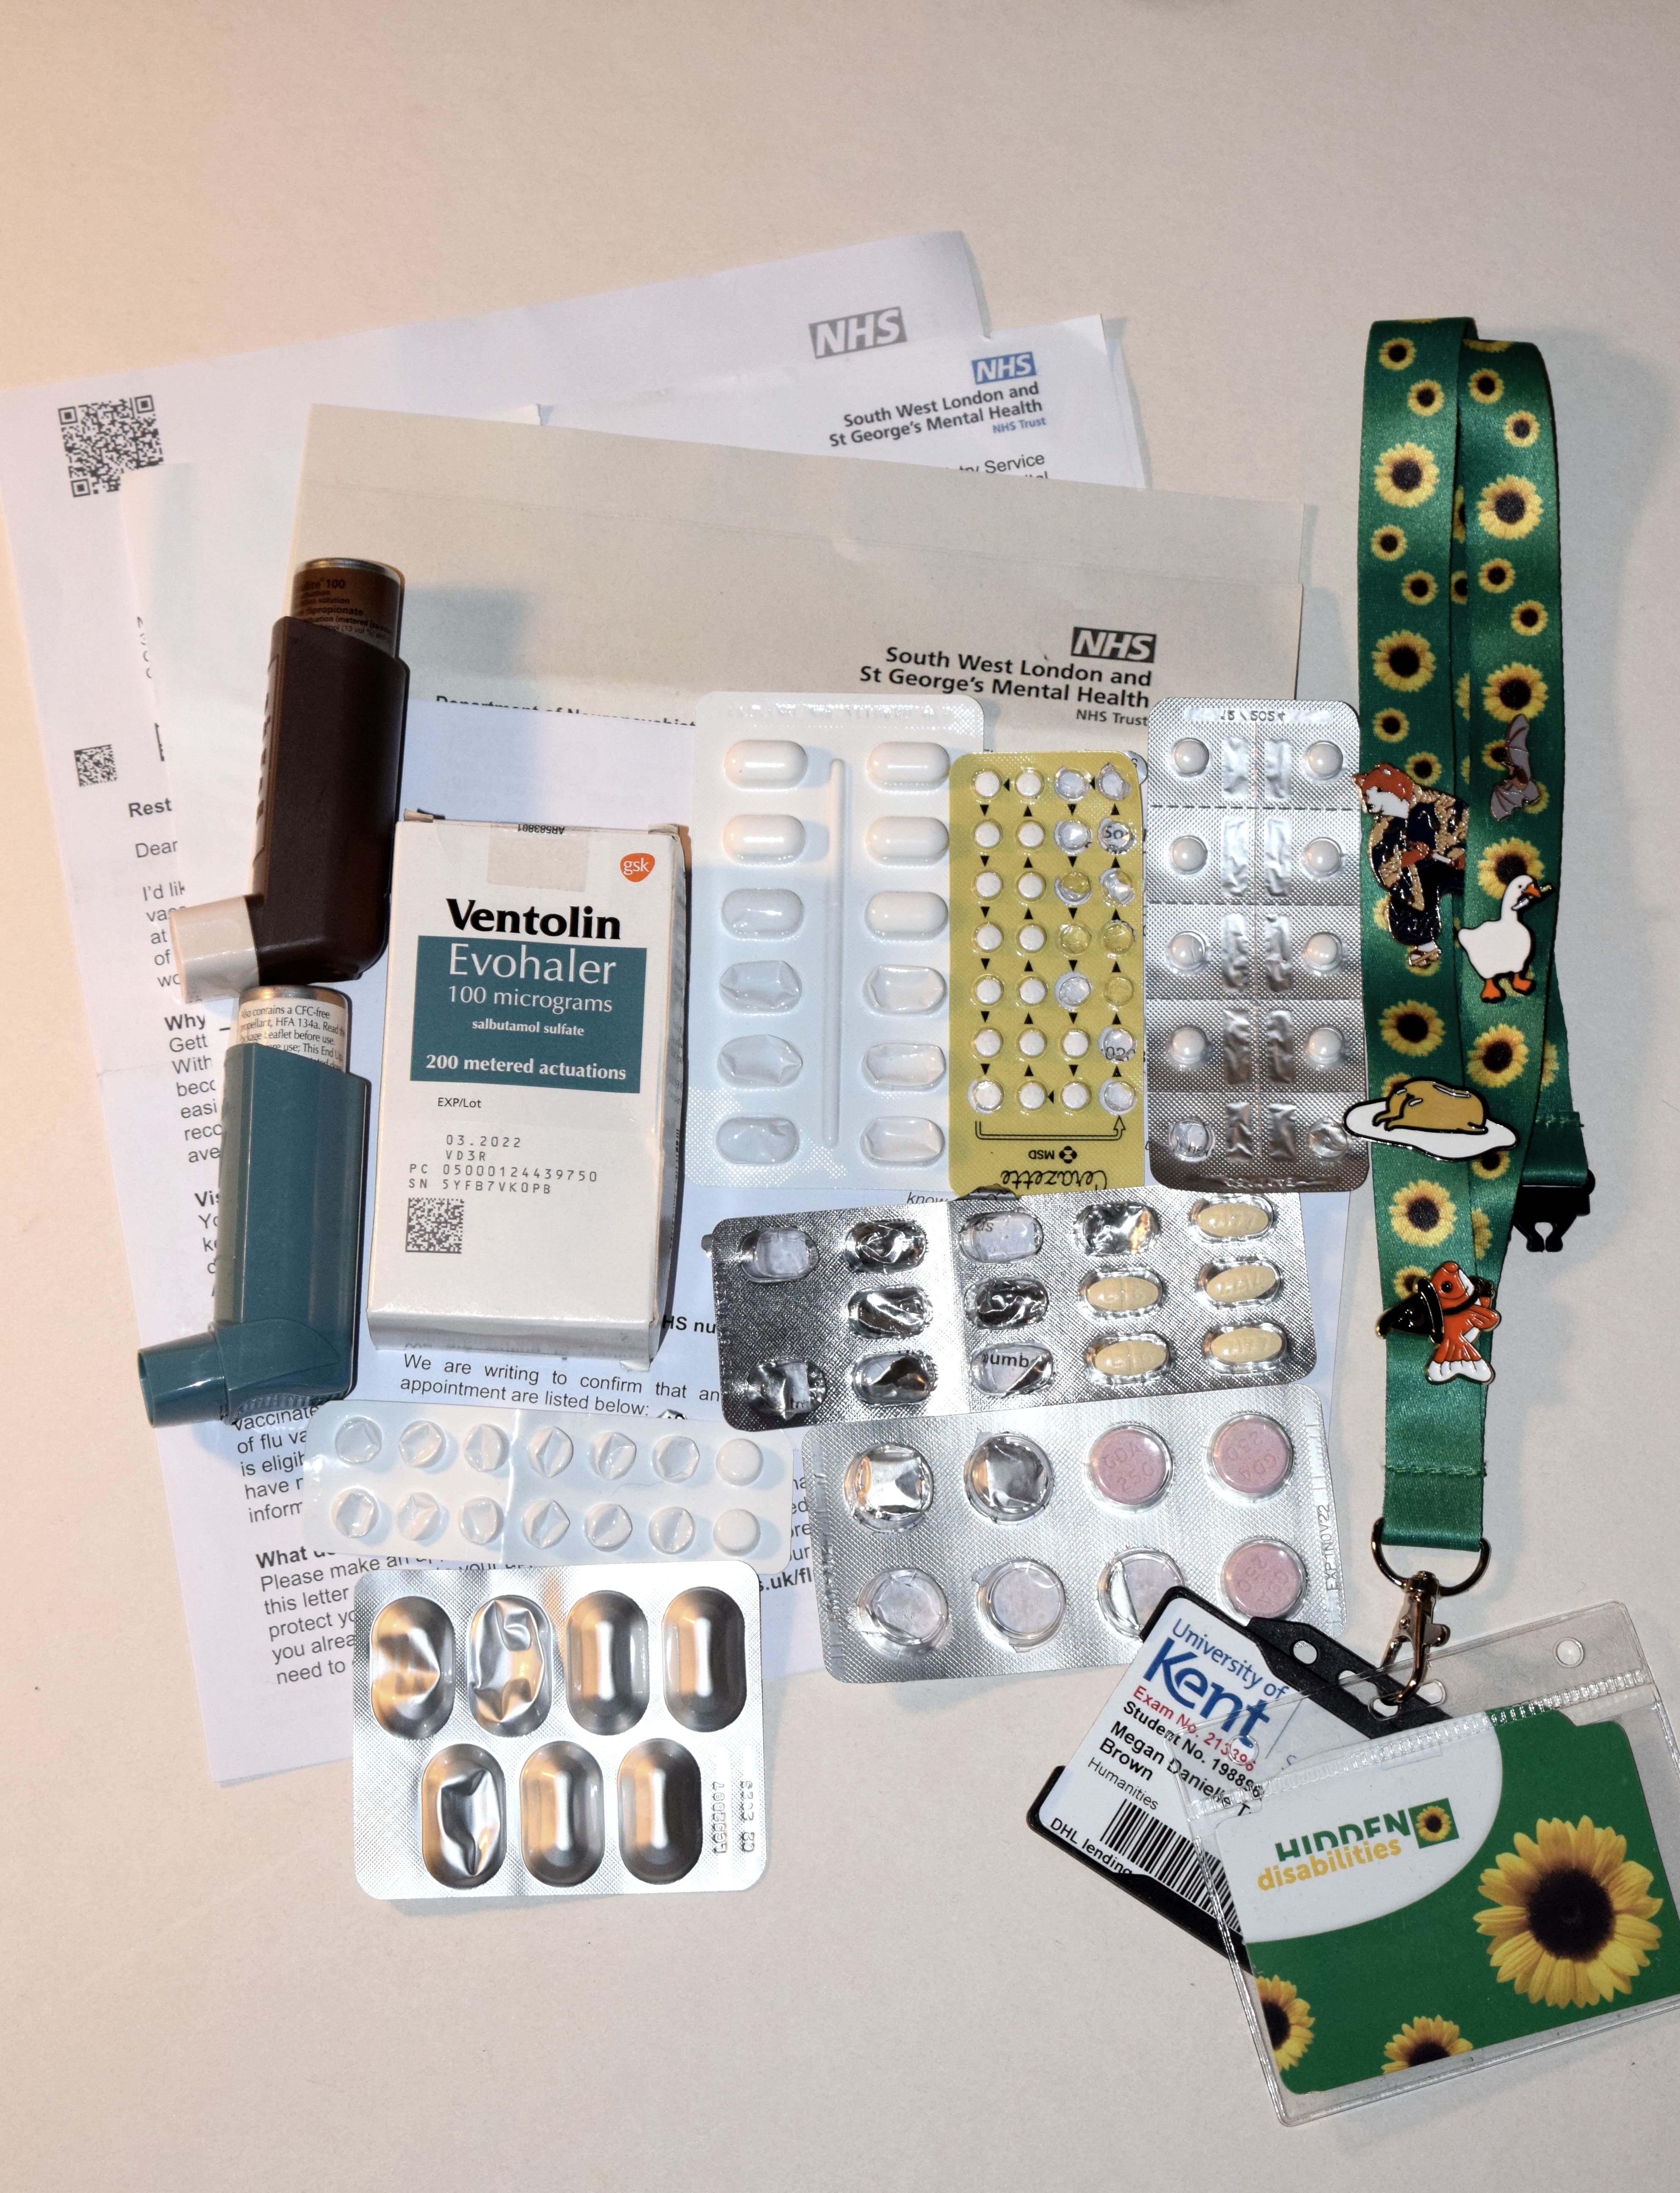 Picture shows a wide selection of medication and several medical letters, demonstrating the poor health of the subject.